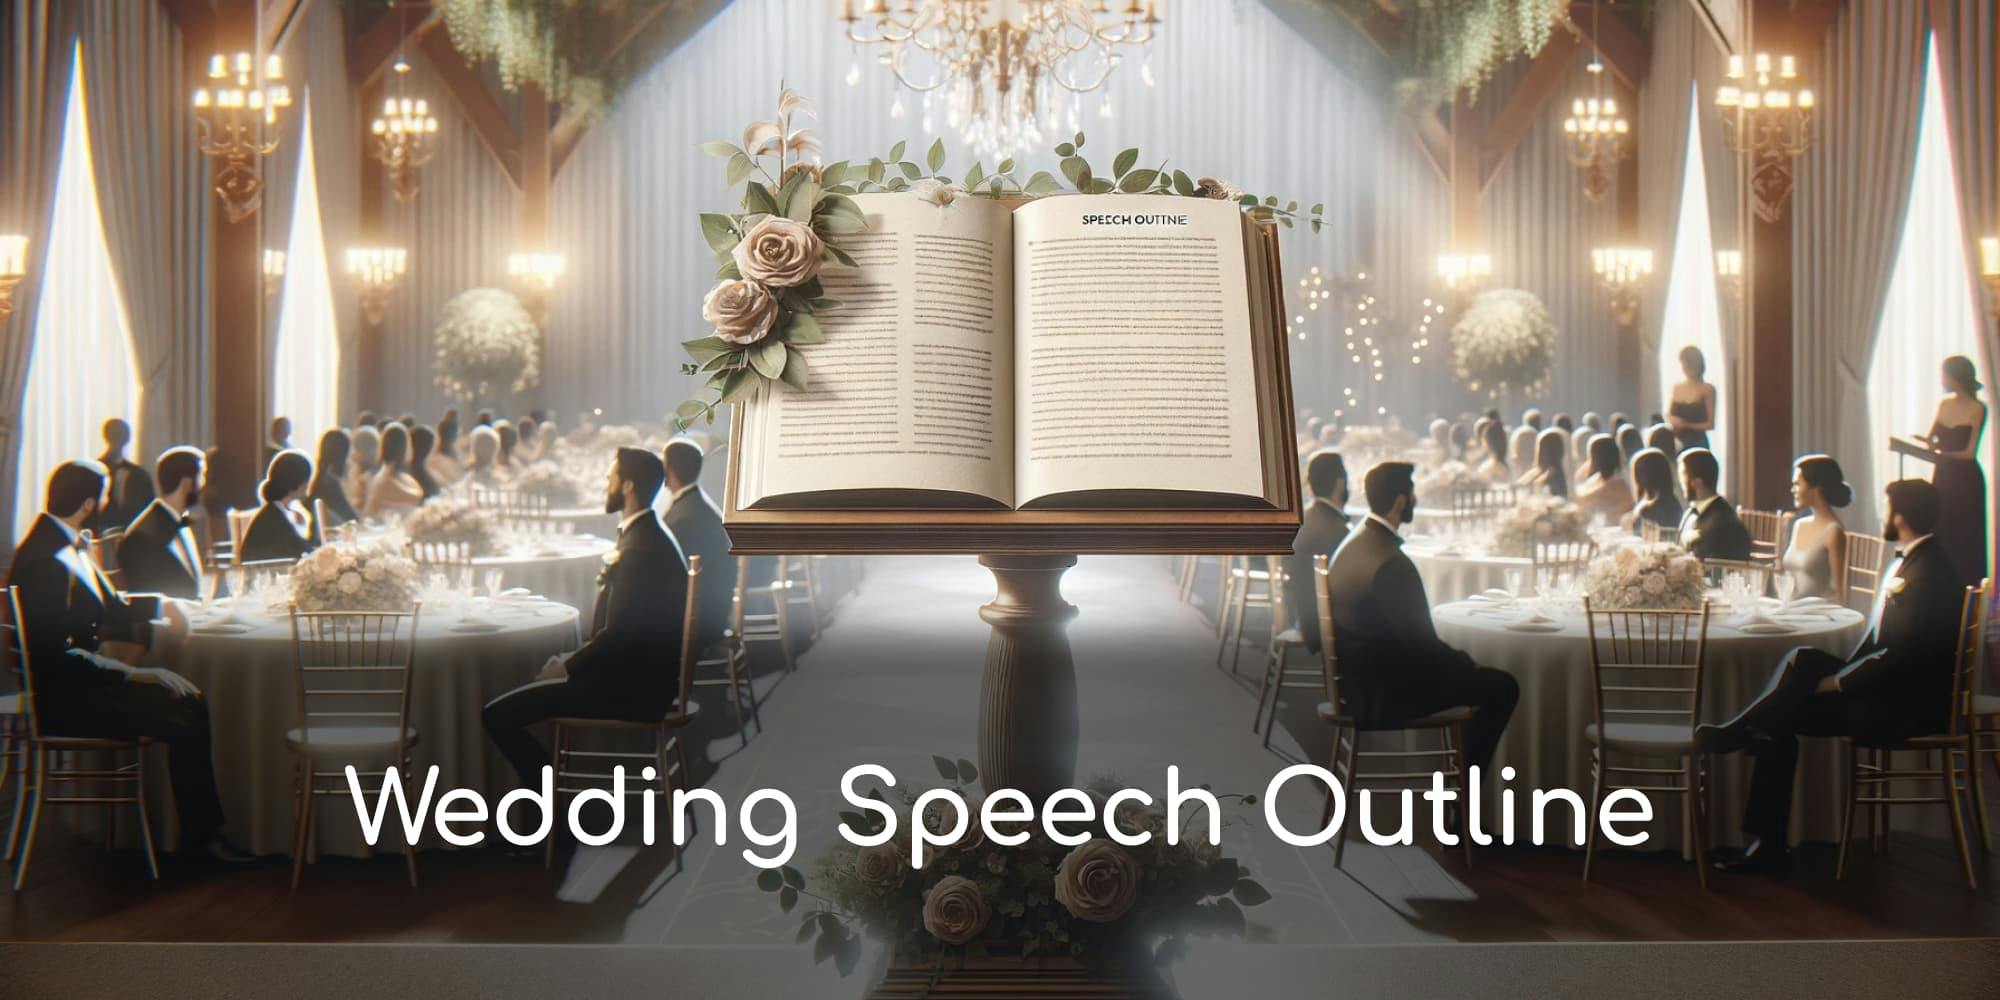 Craft a memorable wedding speech: personal touches, humor, thanks, and a joyful conclusion. Your guide to a cherished toast. 